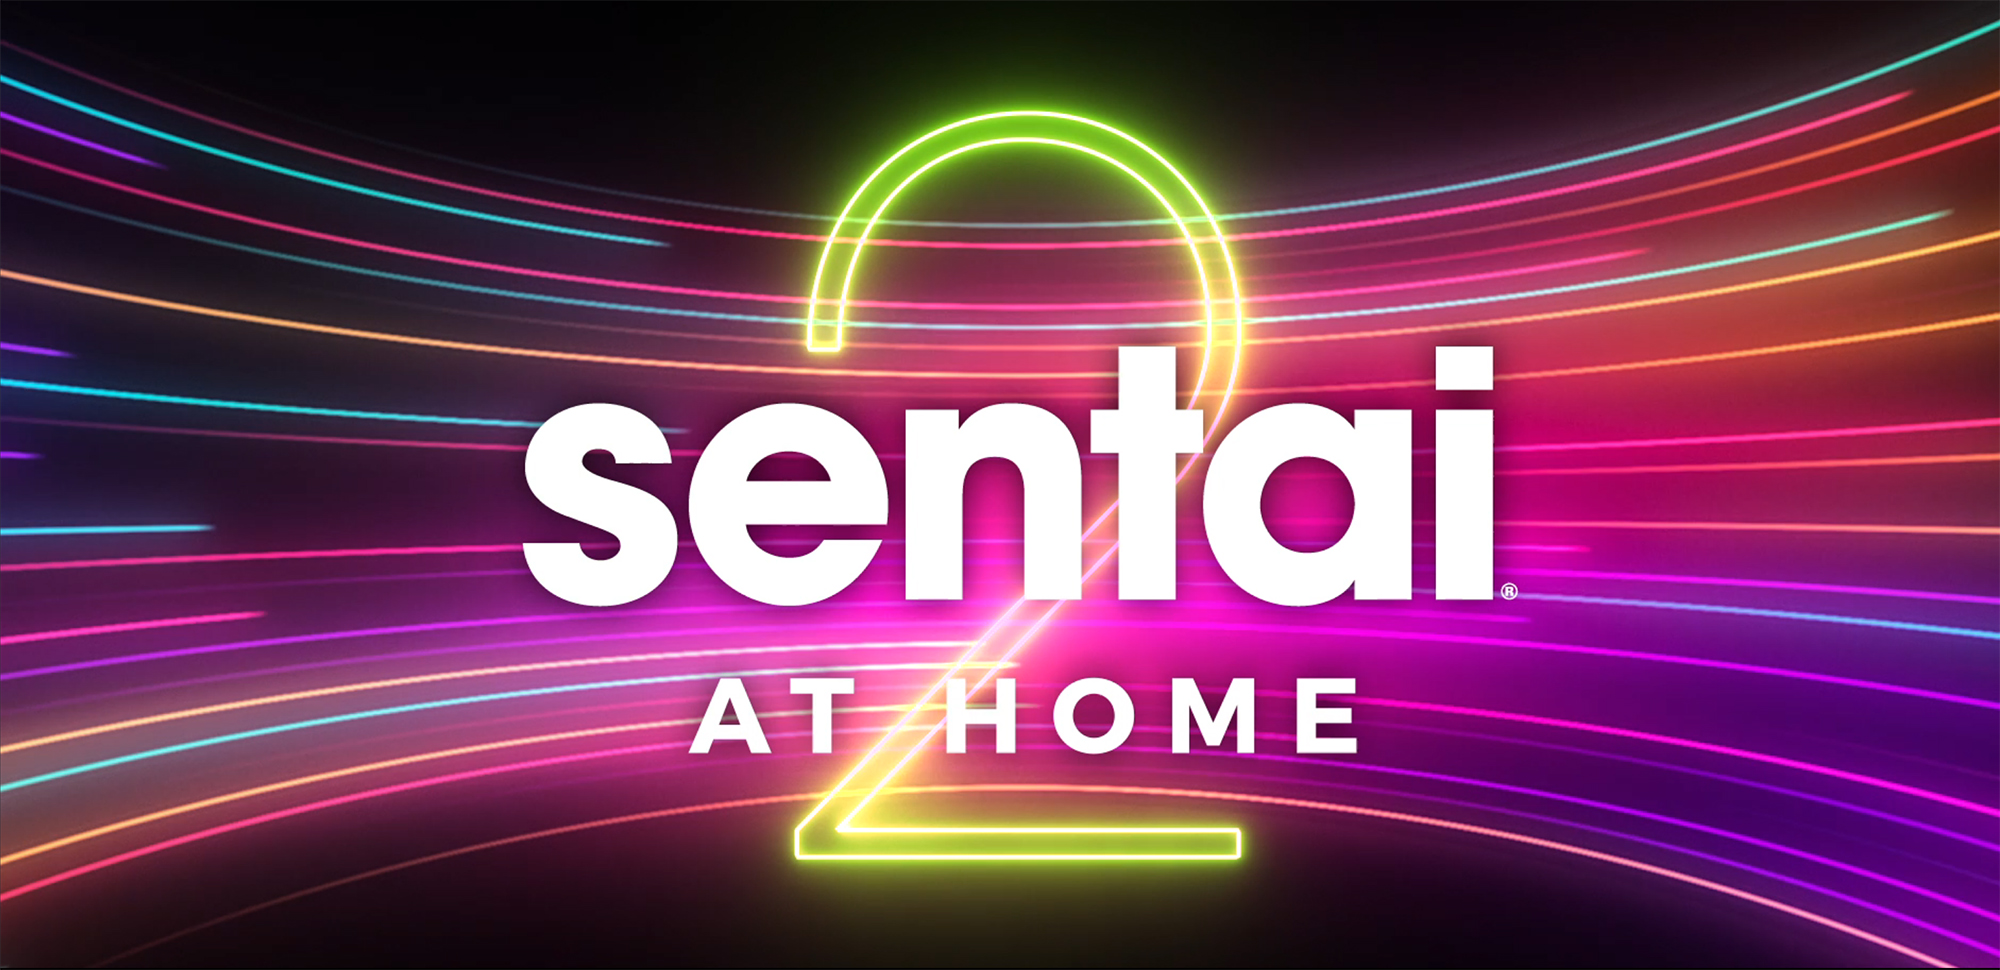 Sentai at Home 2021 Exclusive Guest and Event Lineup Revealed